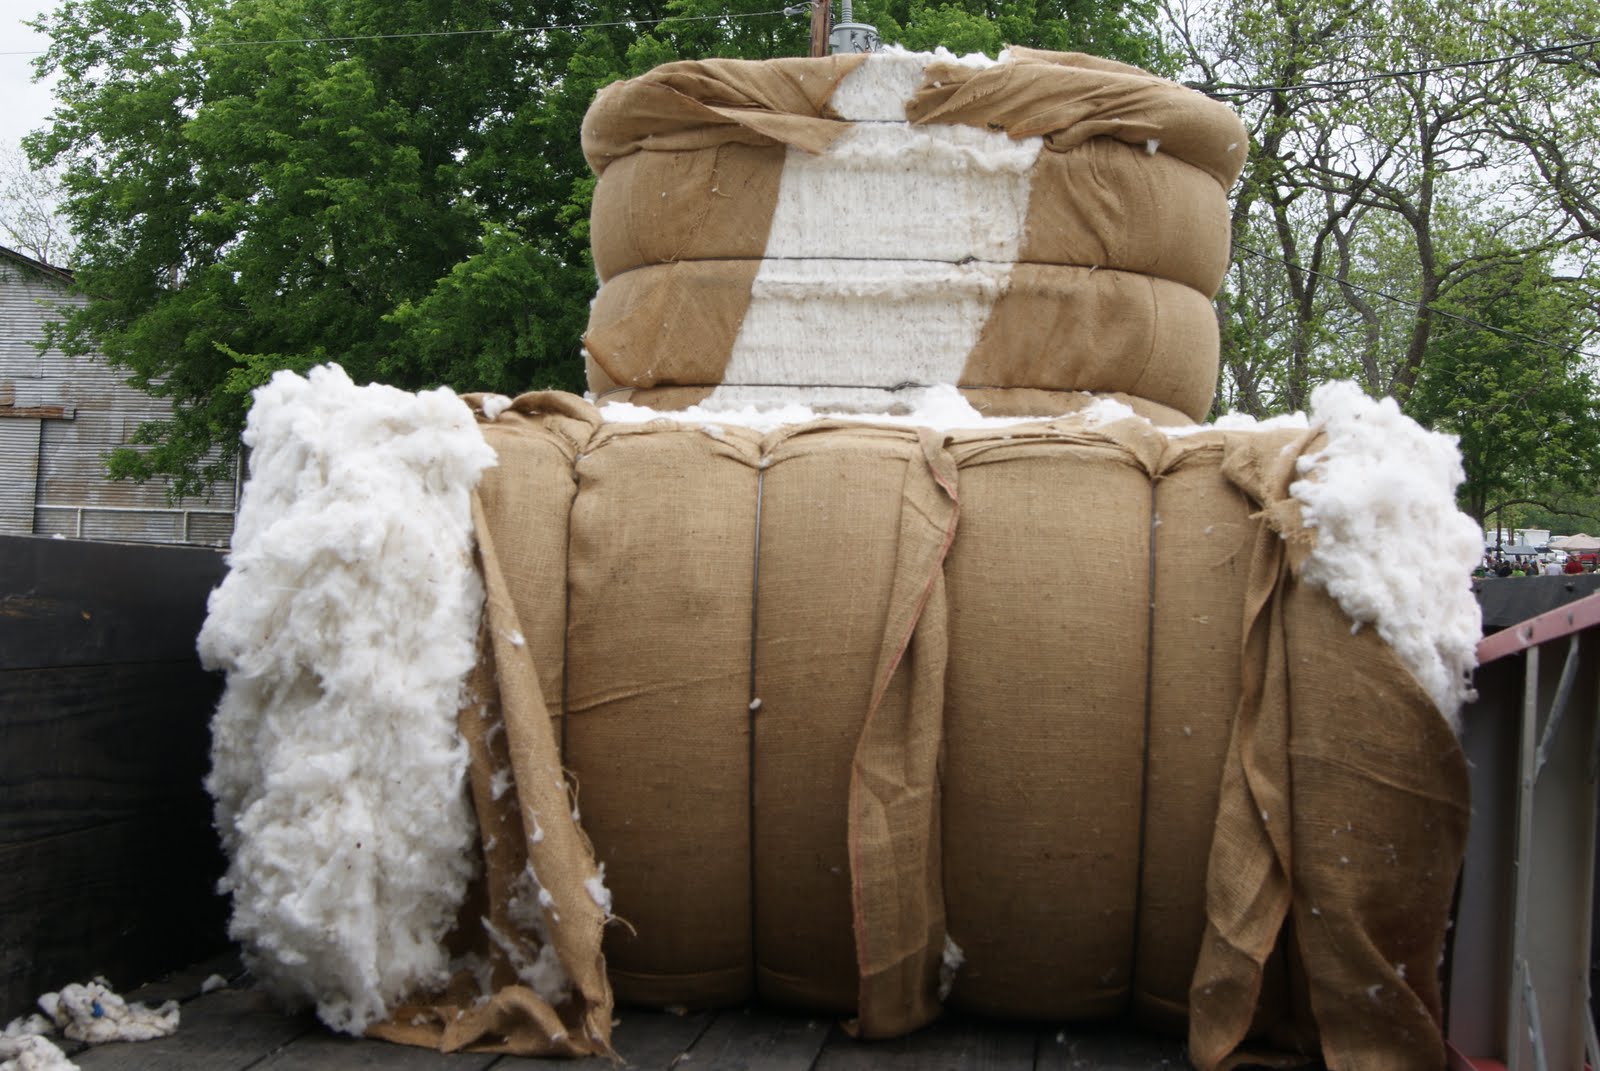 060_cotton_bales_in_back_of_truck.jpg